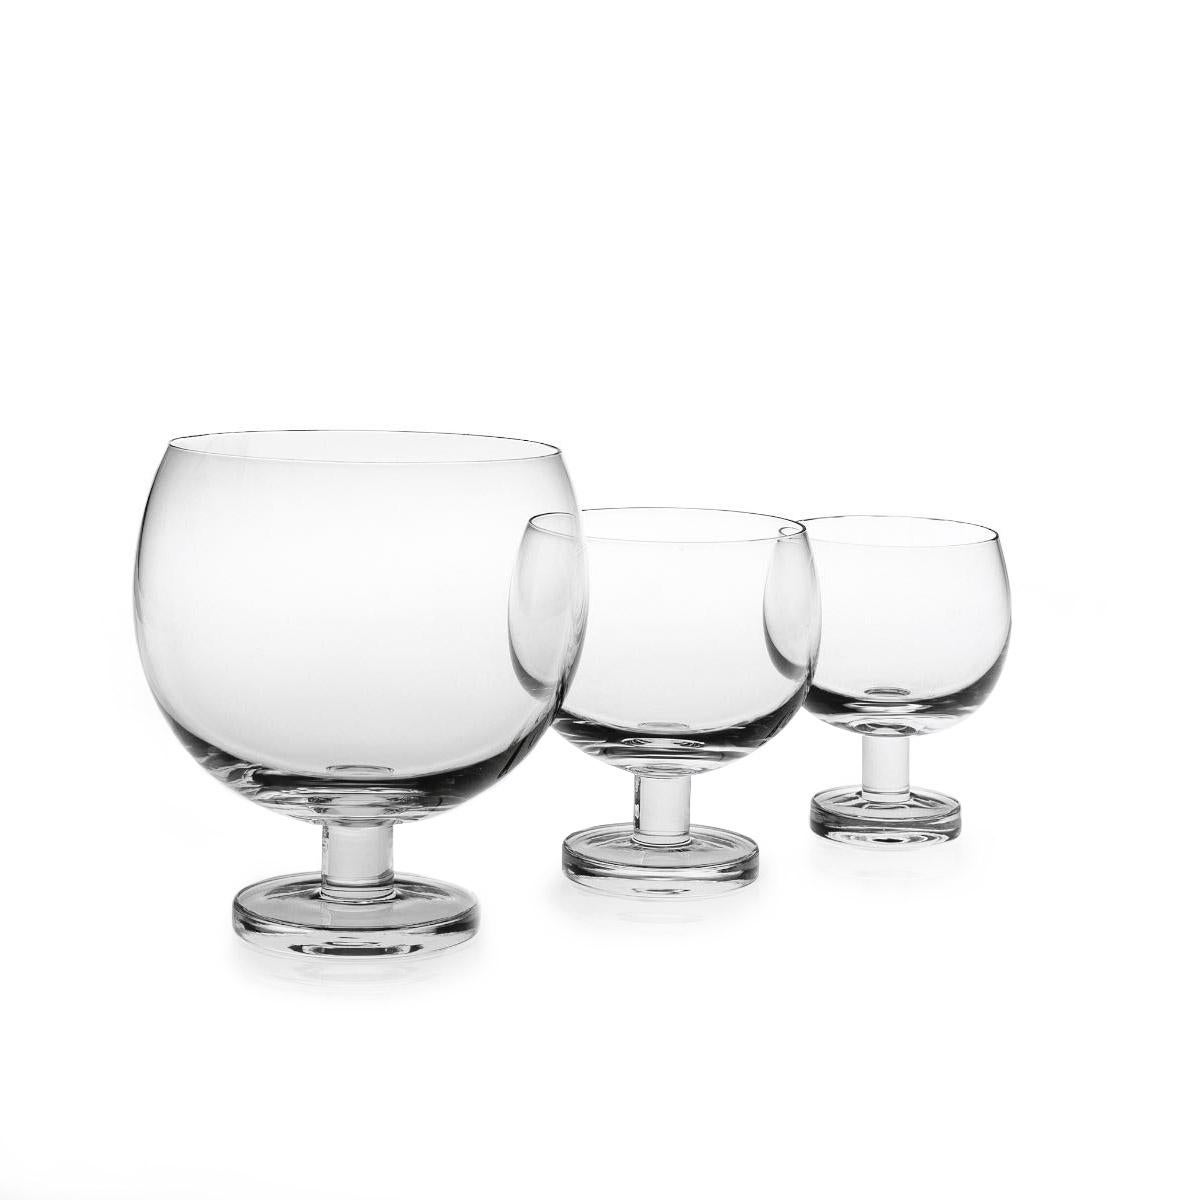 Water glass made in blown in a mold glass. The Tulip collection is a glassware family by Aldo Cibic, who designed these pieces walking the line between classical and postmodern design. The boldly simple geometric forms are at once contemporary and